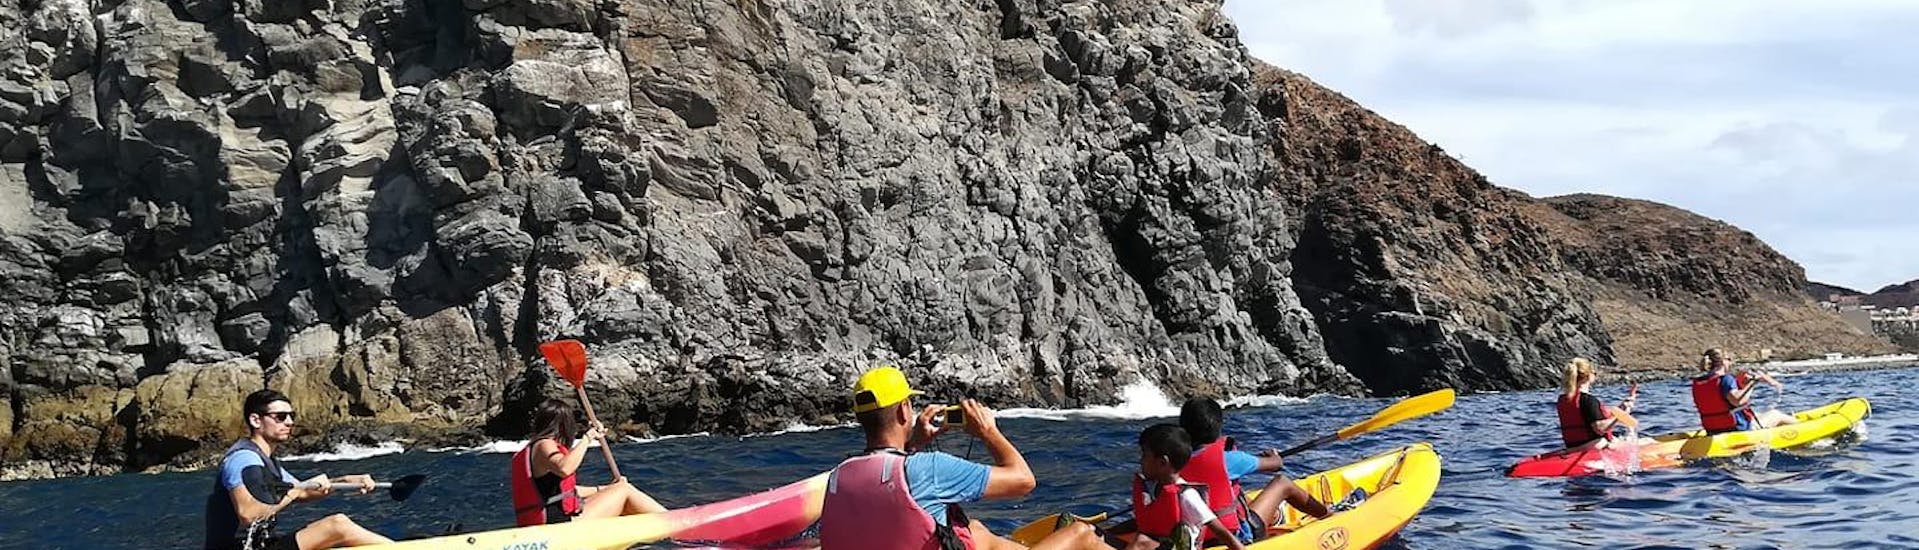 A sea kayaking excursion from Los Cristianos goes to a cliff with Kayak Academy Tenerife.